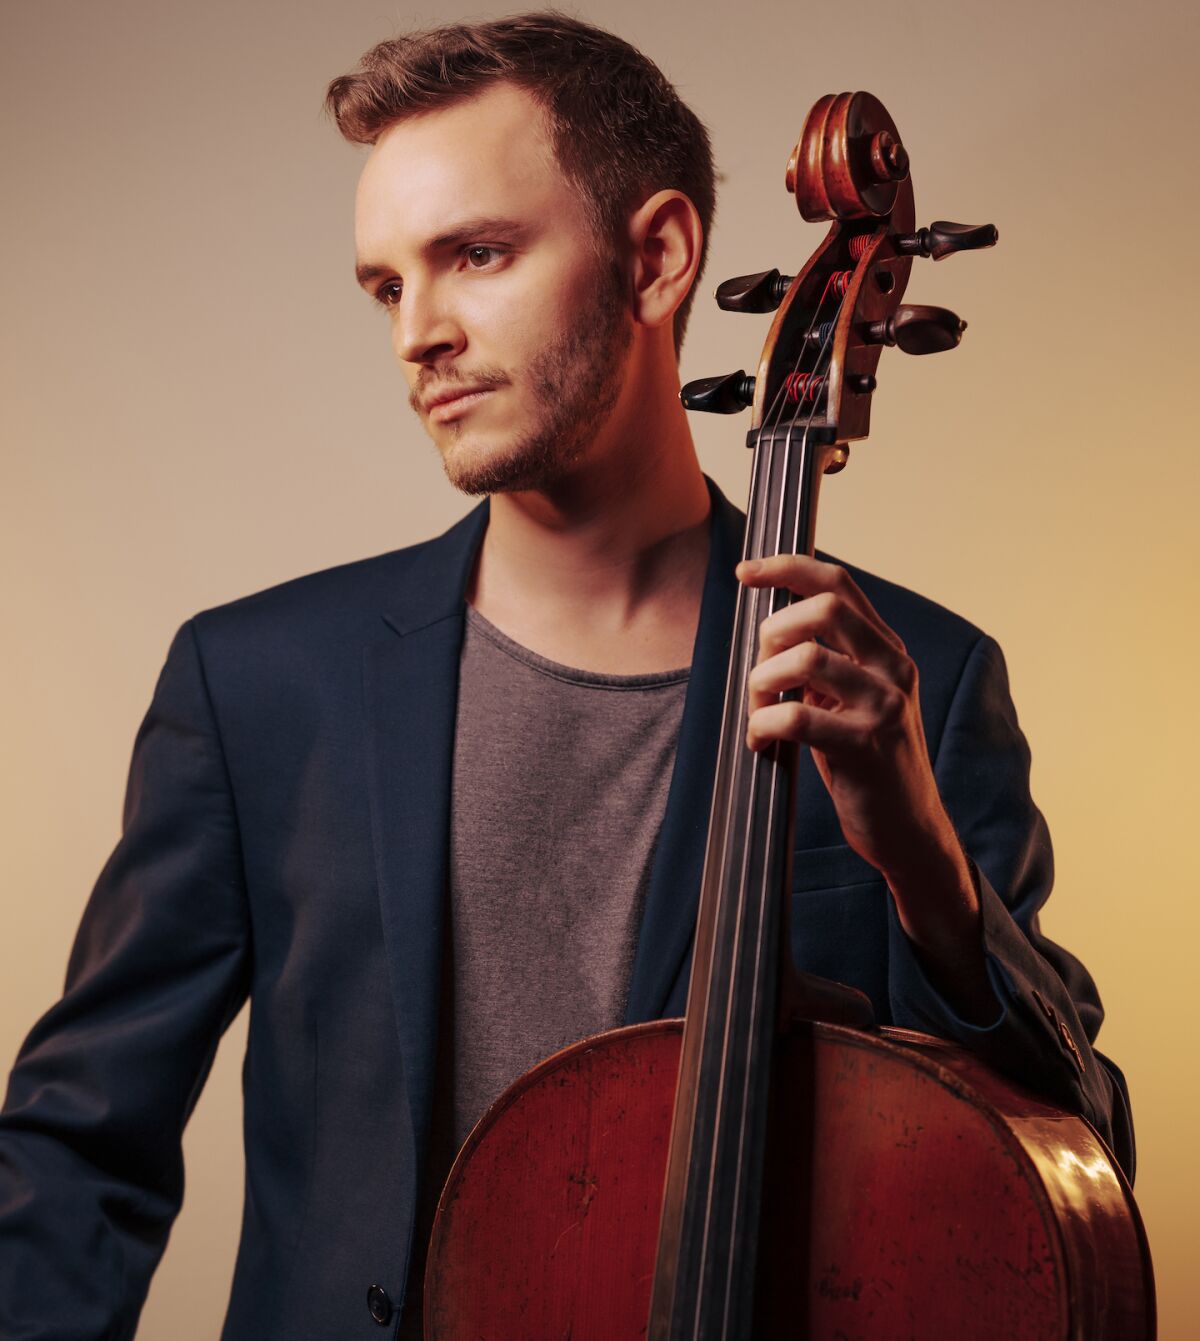 Cellist Coleman Itzkoff, who appeared as a fellowship artist in 2014, will play SummerFest this year.